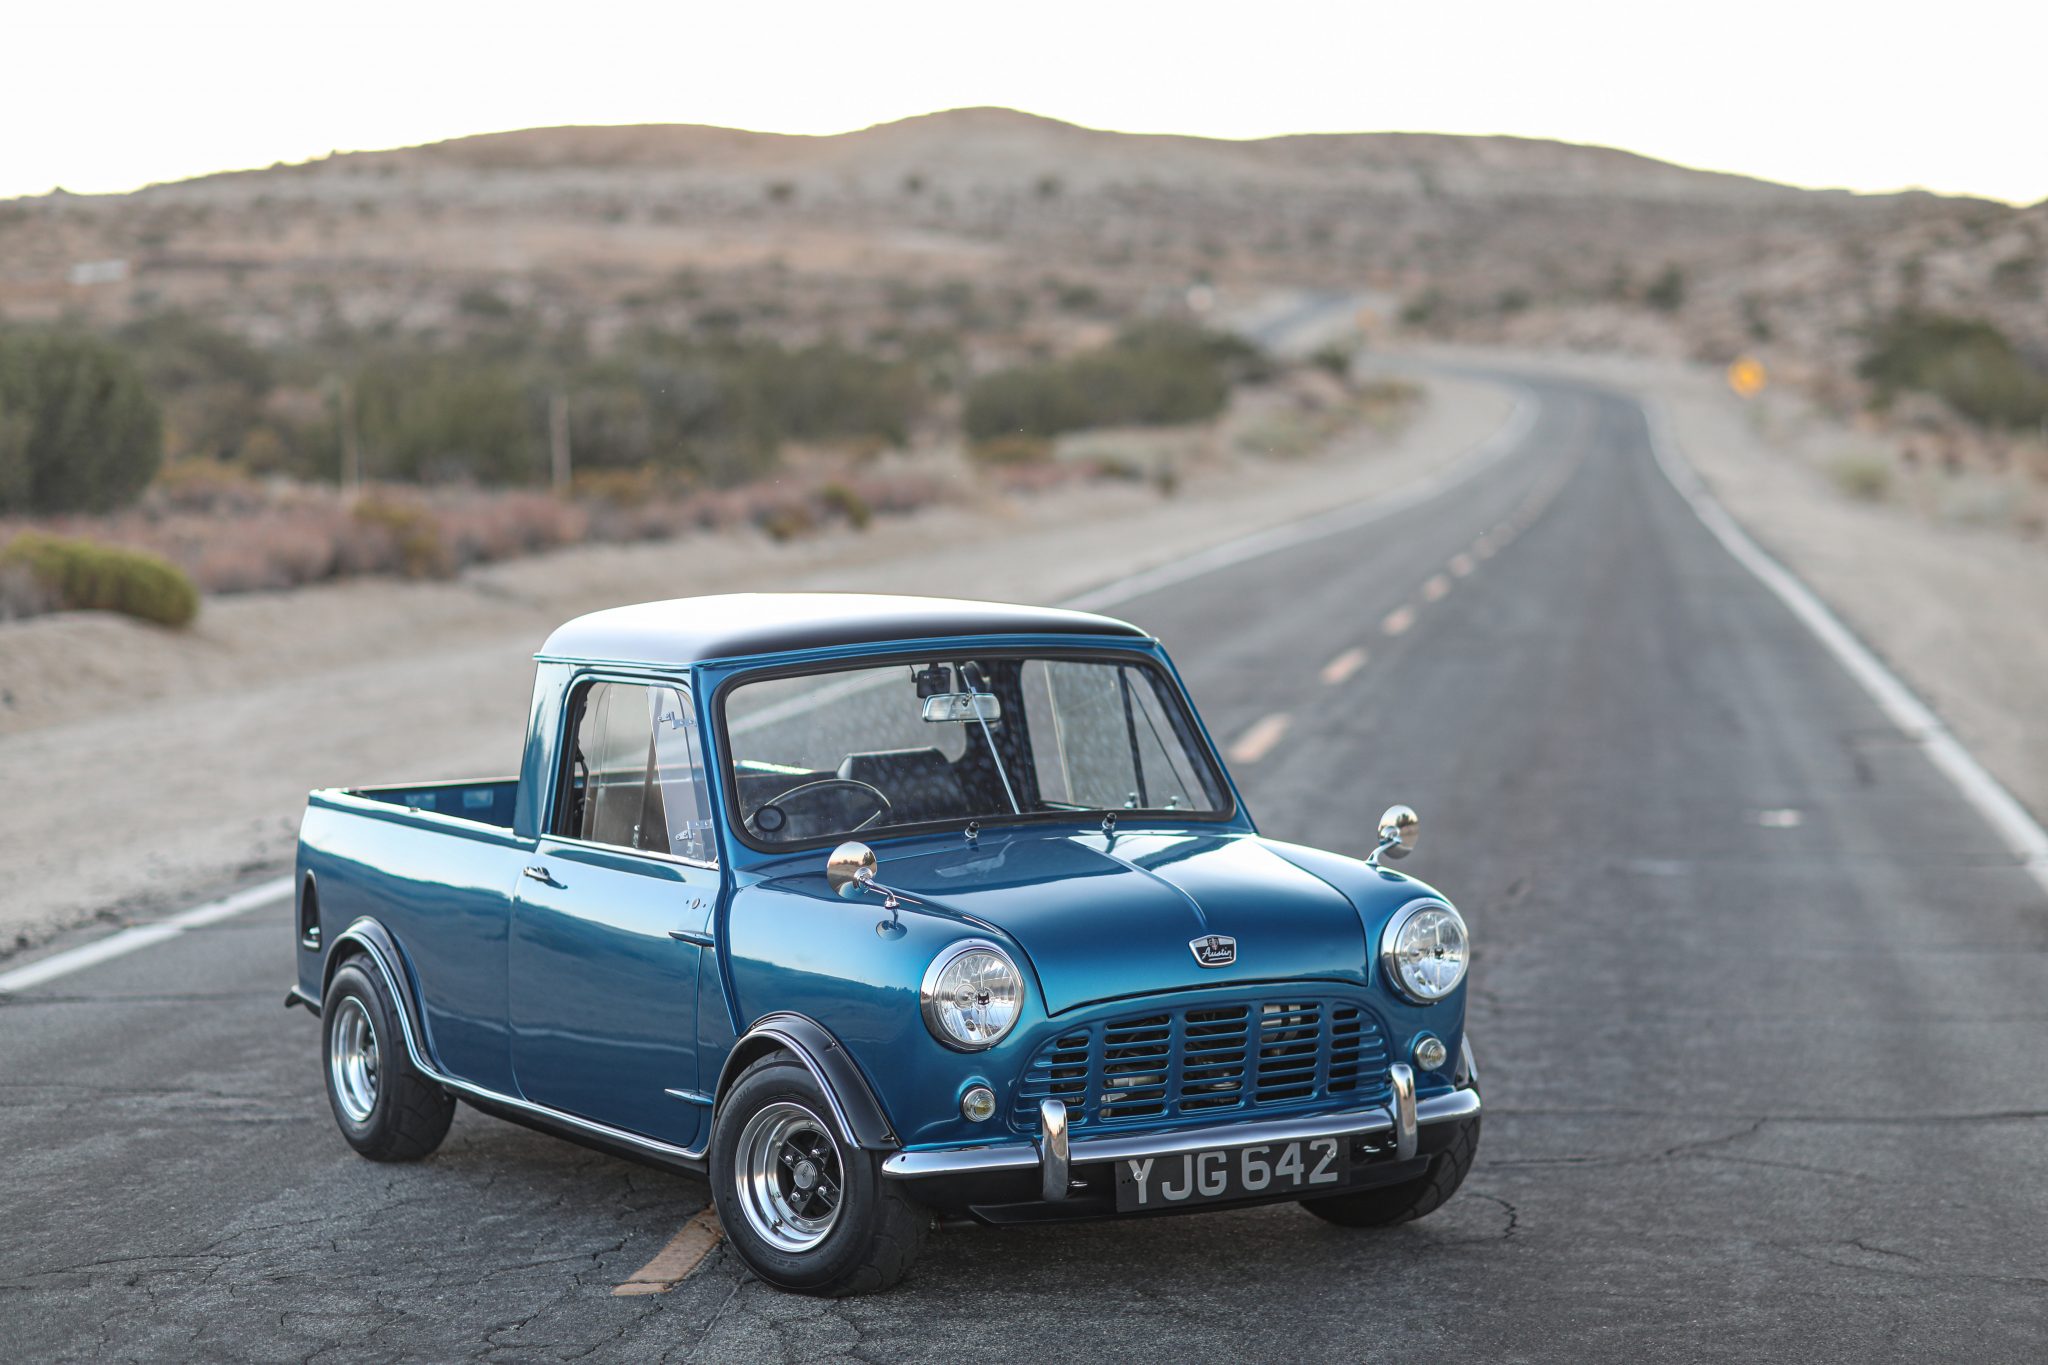 This gorgeous Mini pickup is a true pick-me-up